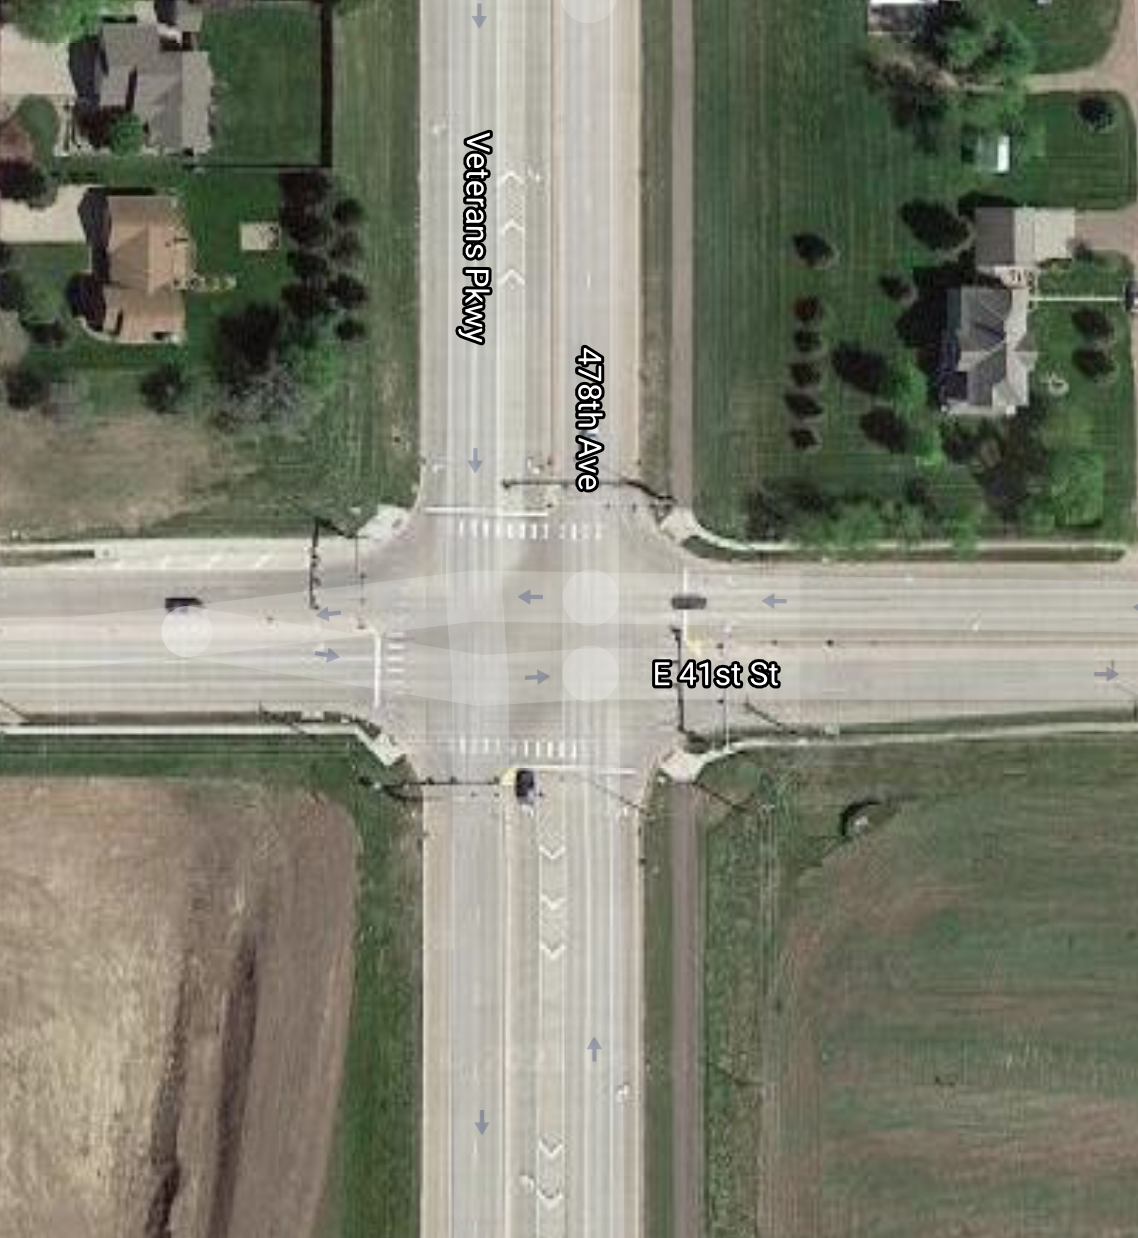 The intersection of 41st Street and Highway 11